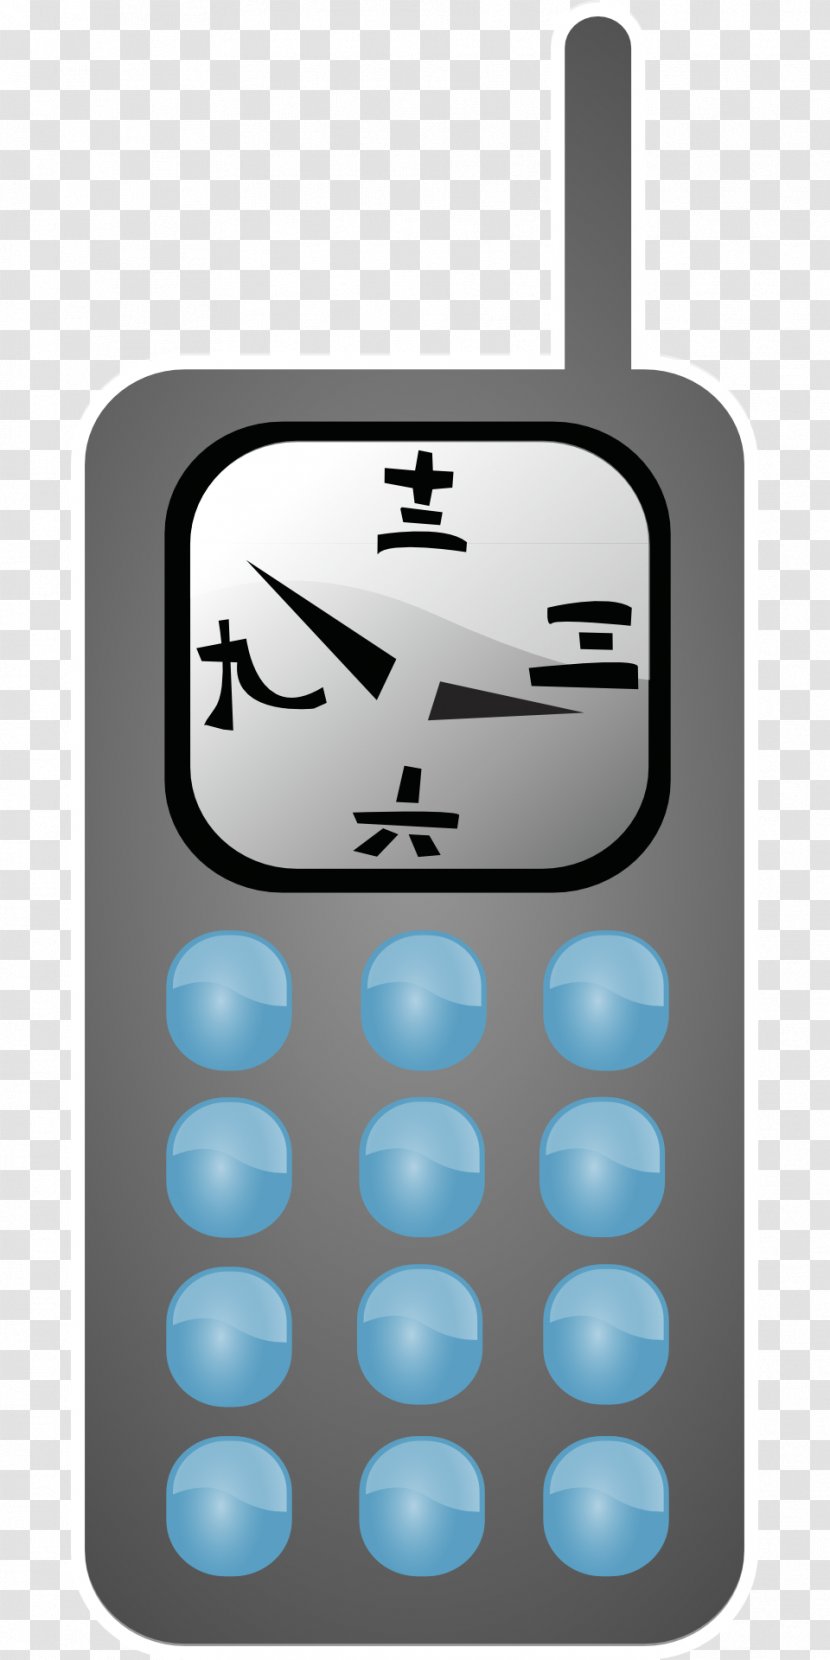 Telephone IPhone Smartphone Email Clip Art - Electronics - Iphone Transparent PNG